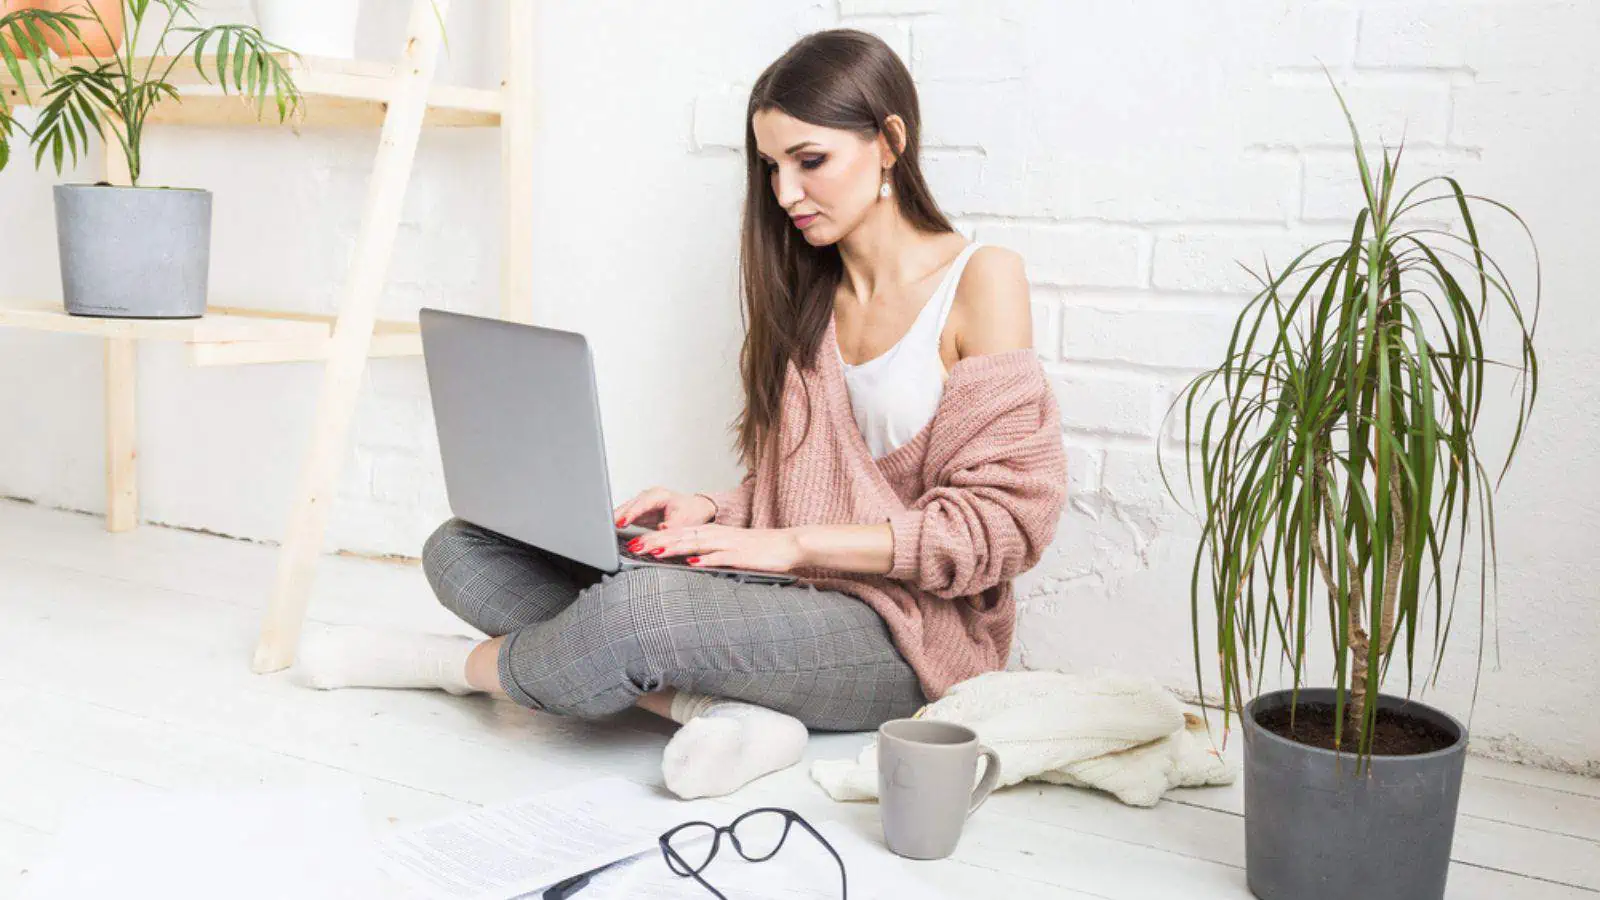 woman working at her computer at home sitting on the floor plants